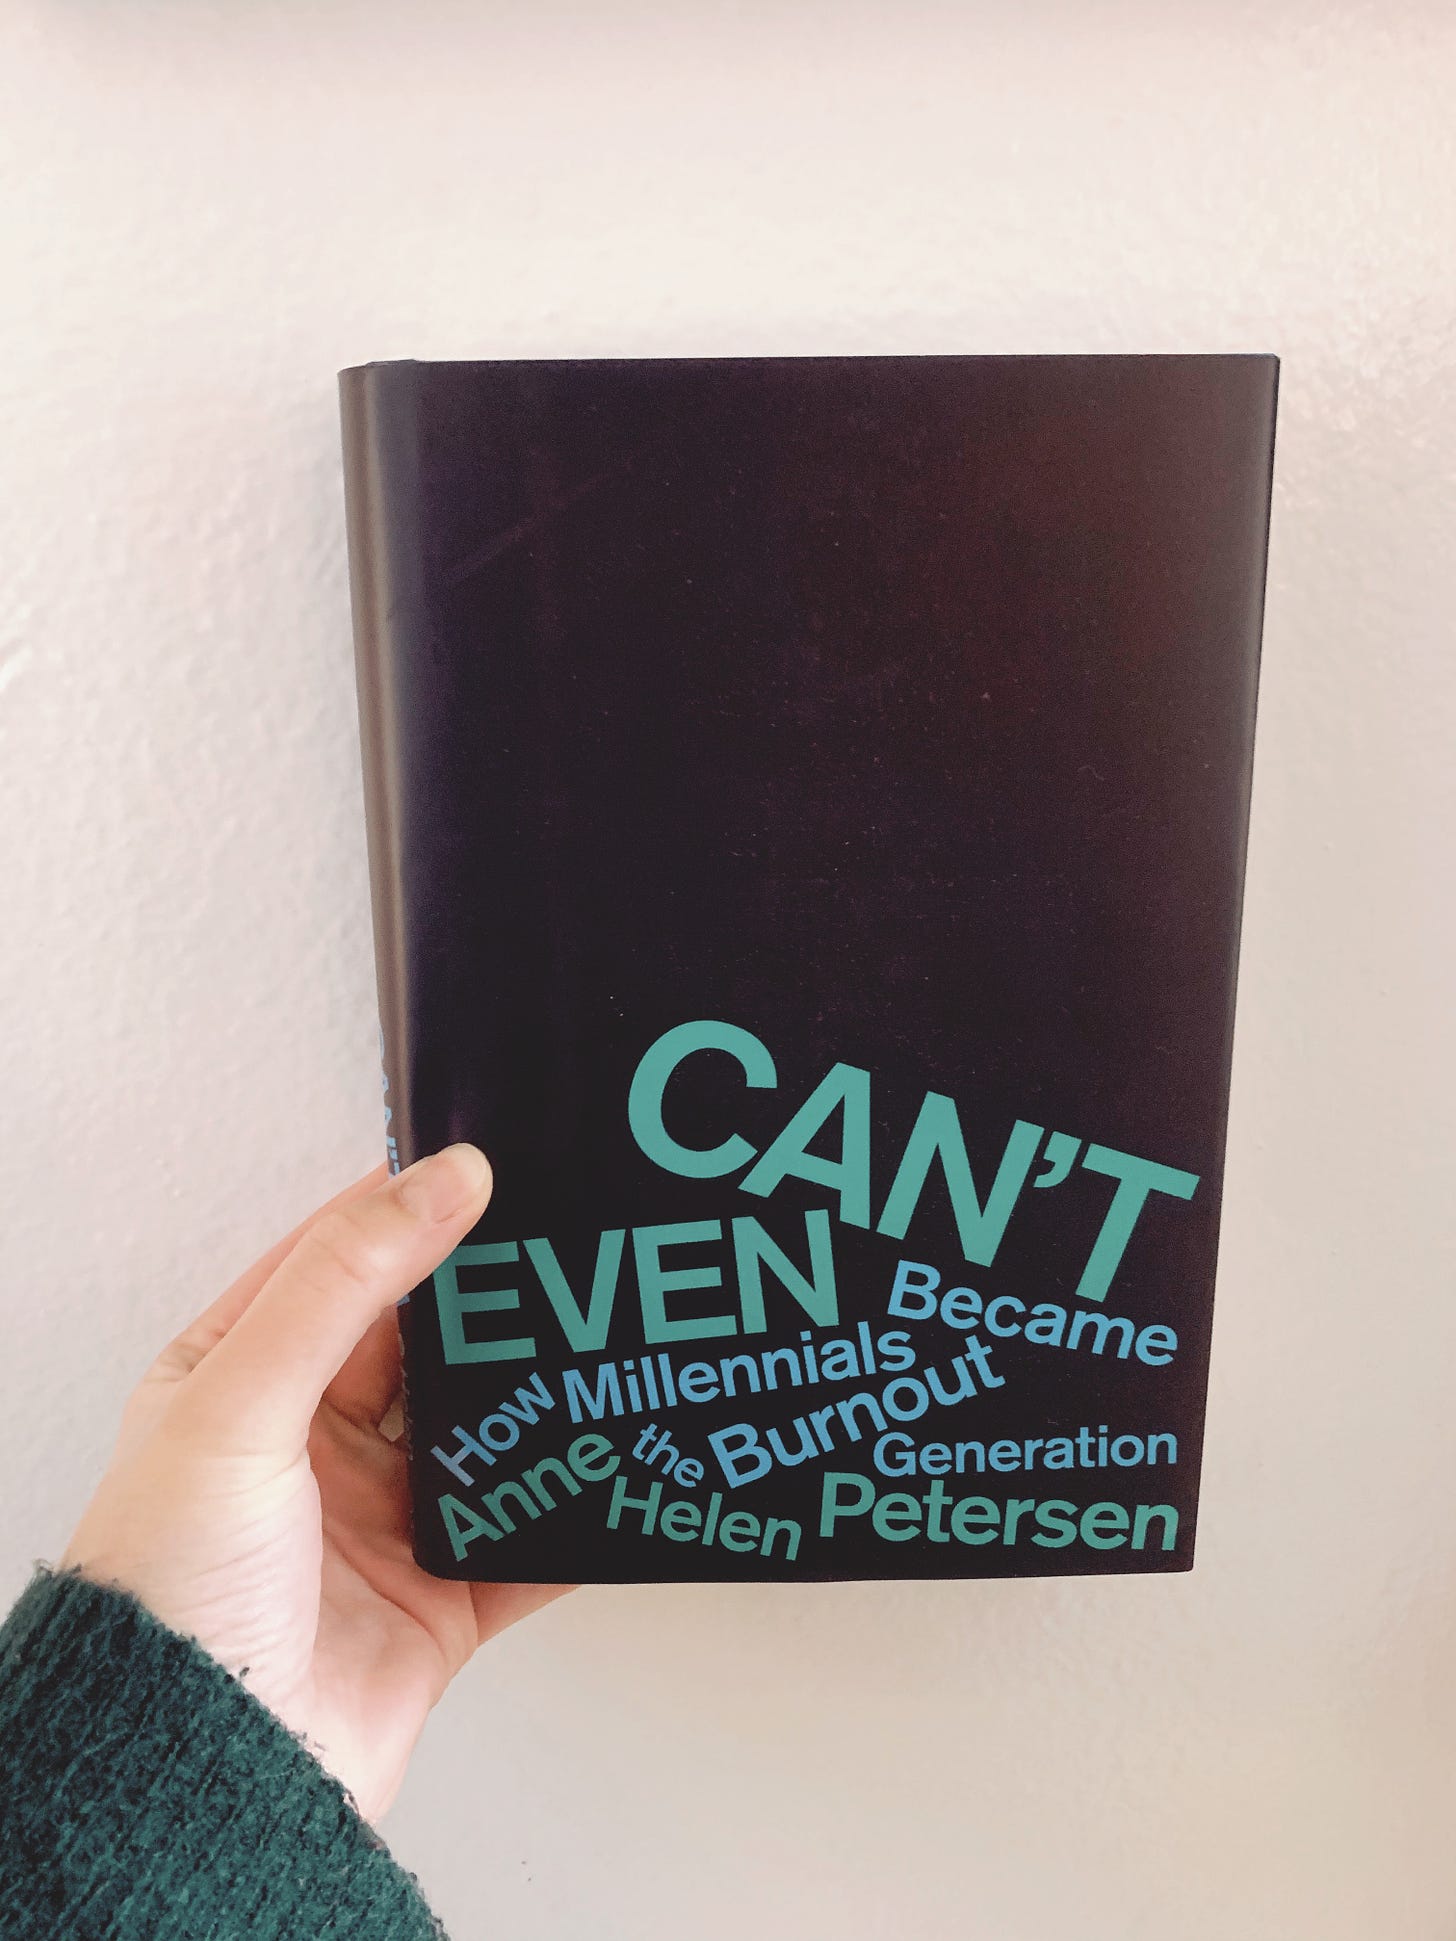 Dark blue hardback book against a white wall. Title of book reads, "Can't Even: How Millennials Became the Burnout Generation" by Anne Helen Petersen